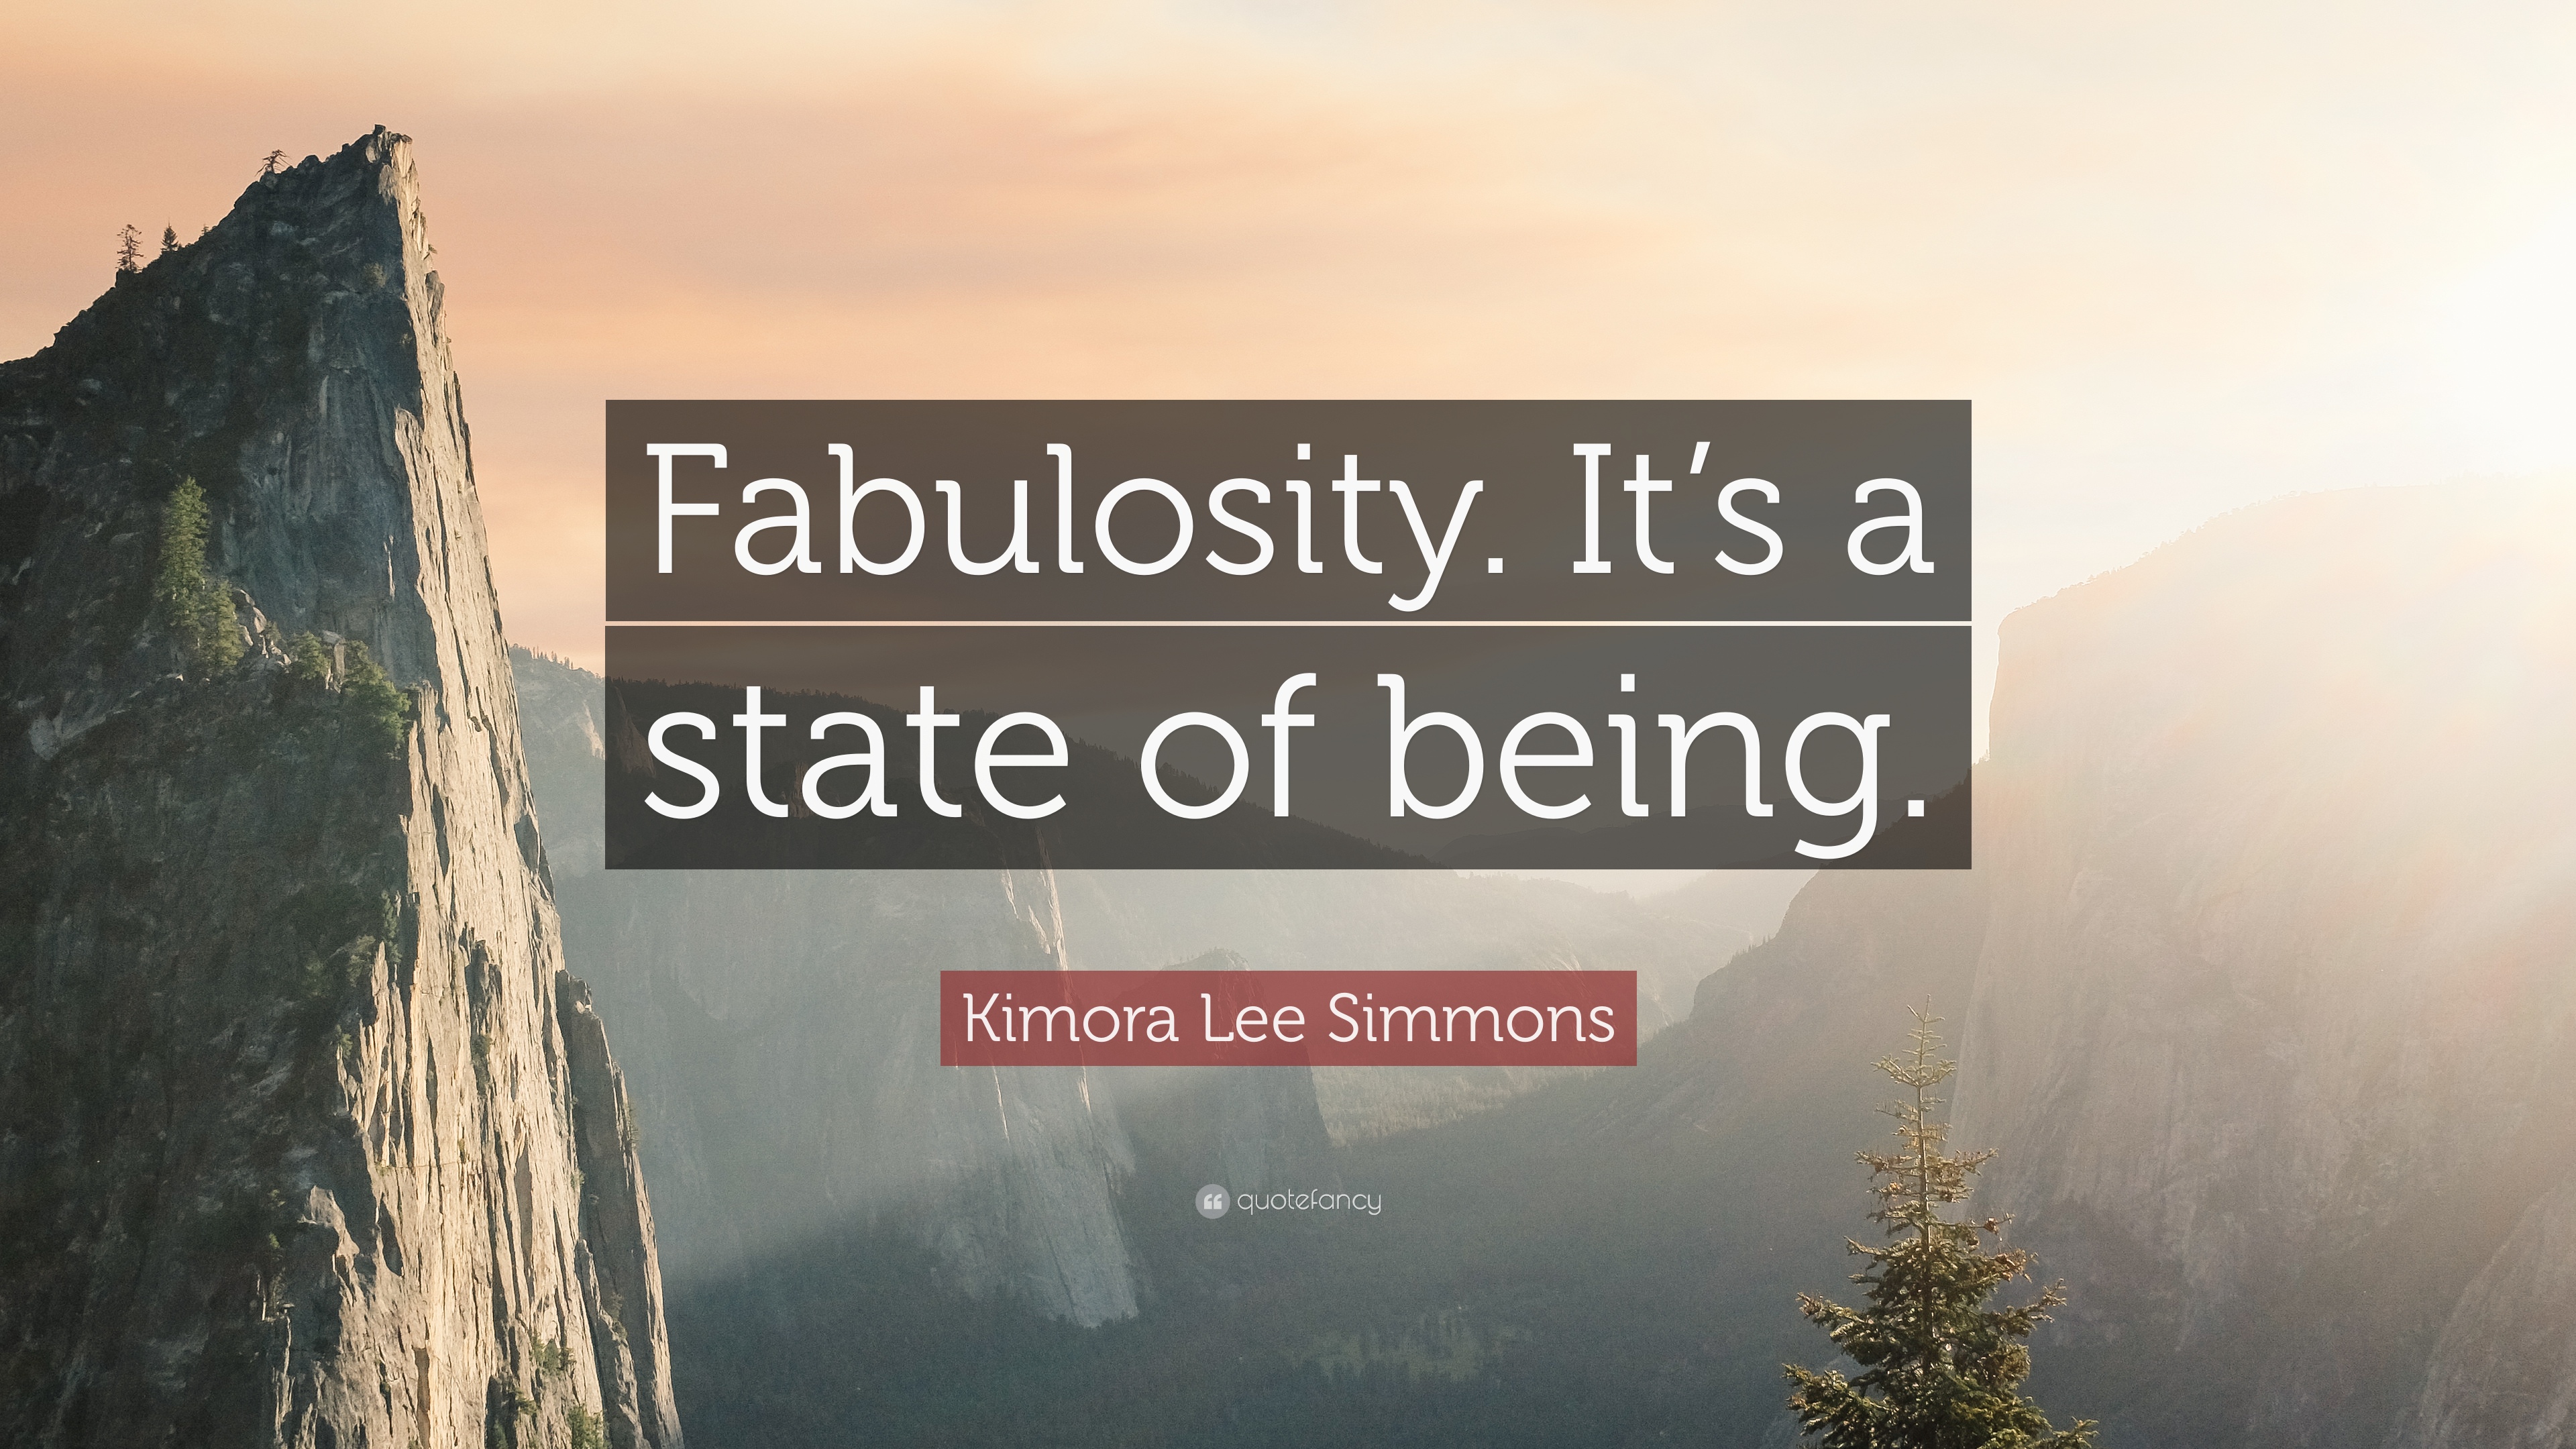 Kimora Lee Simmons Quote: “Fabulosity. It's a state of being.” 7